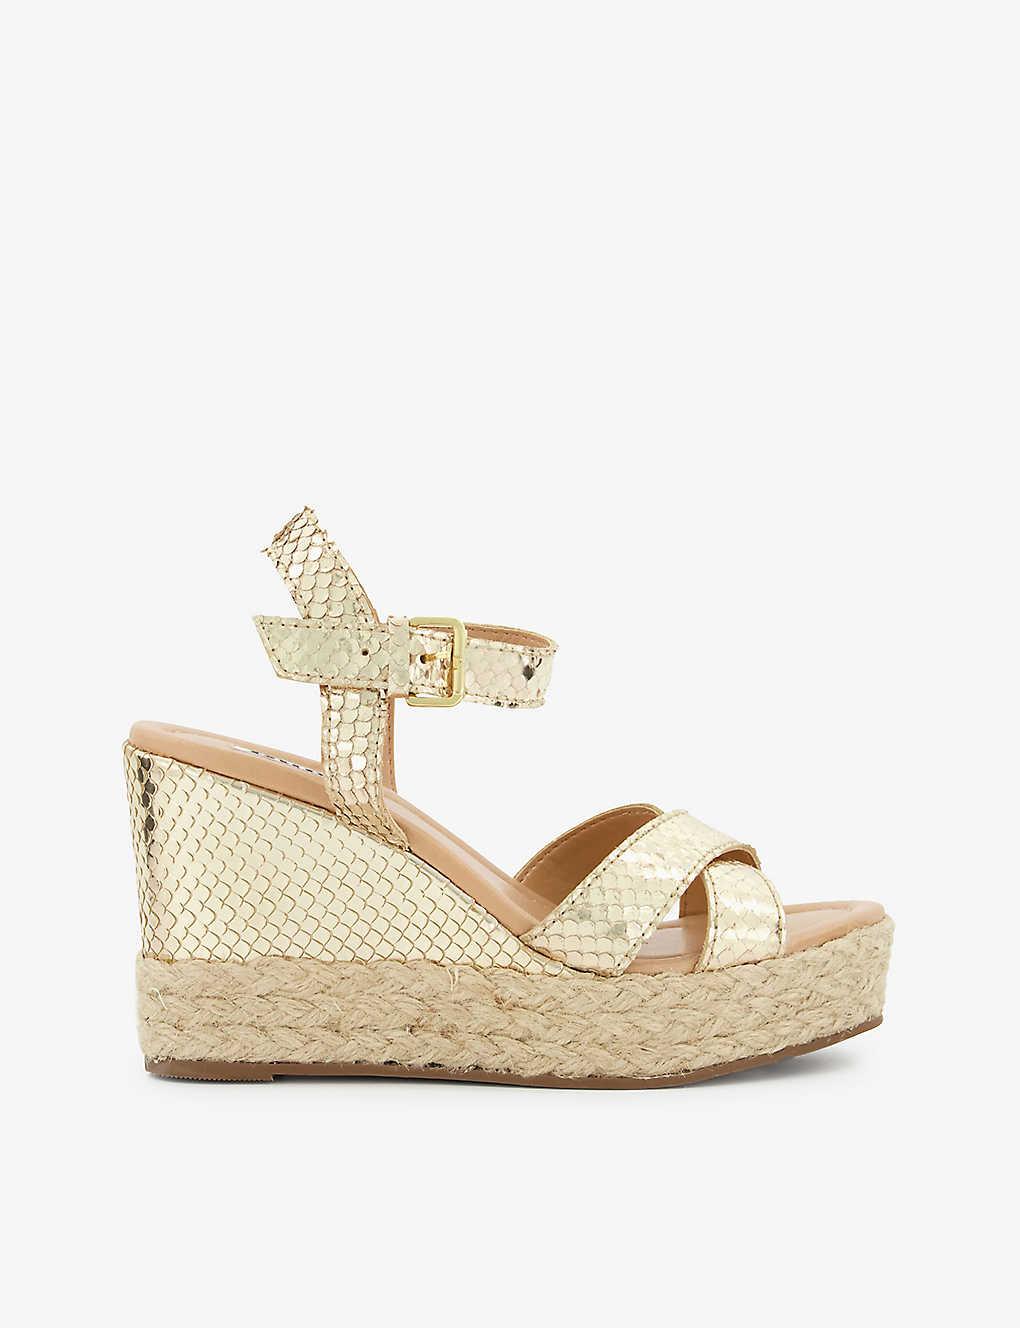 Dune Kind Cross-strap Leather Wedge Sandals in Natural | Lyst